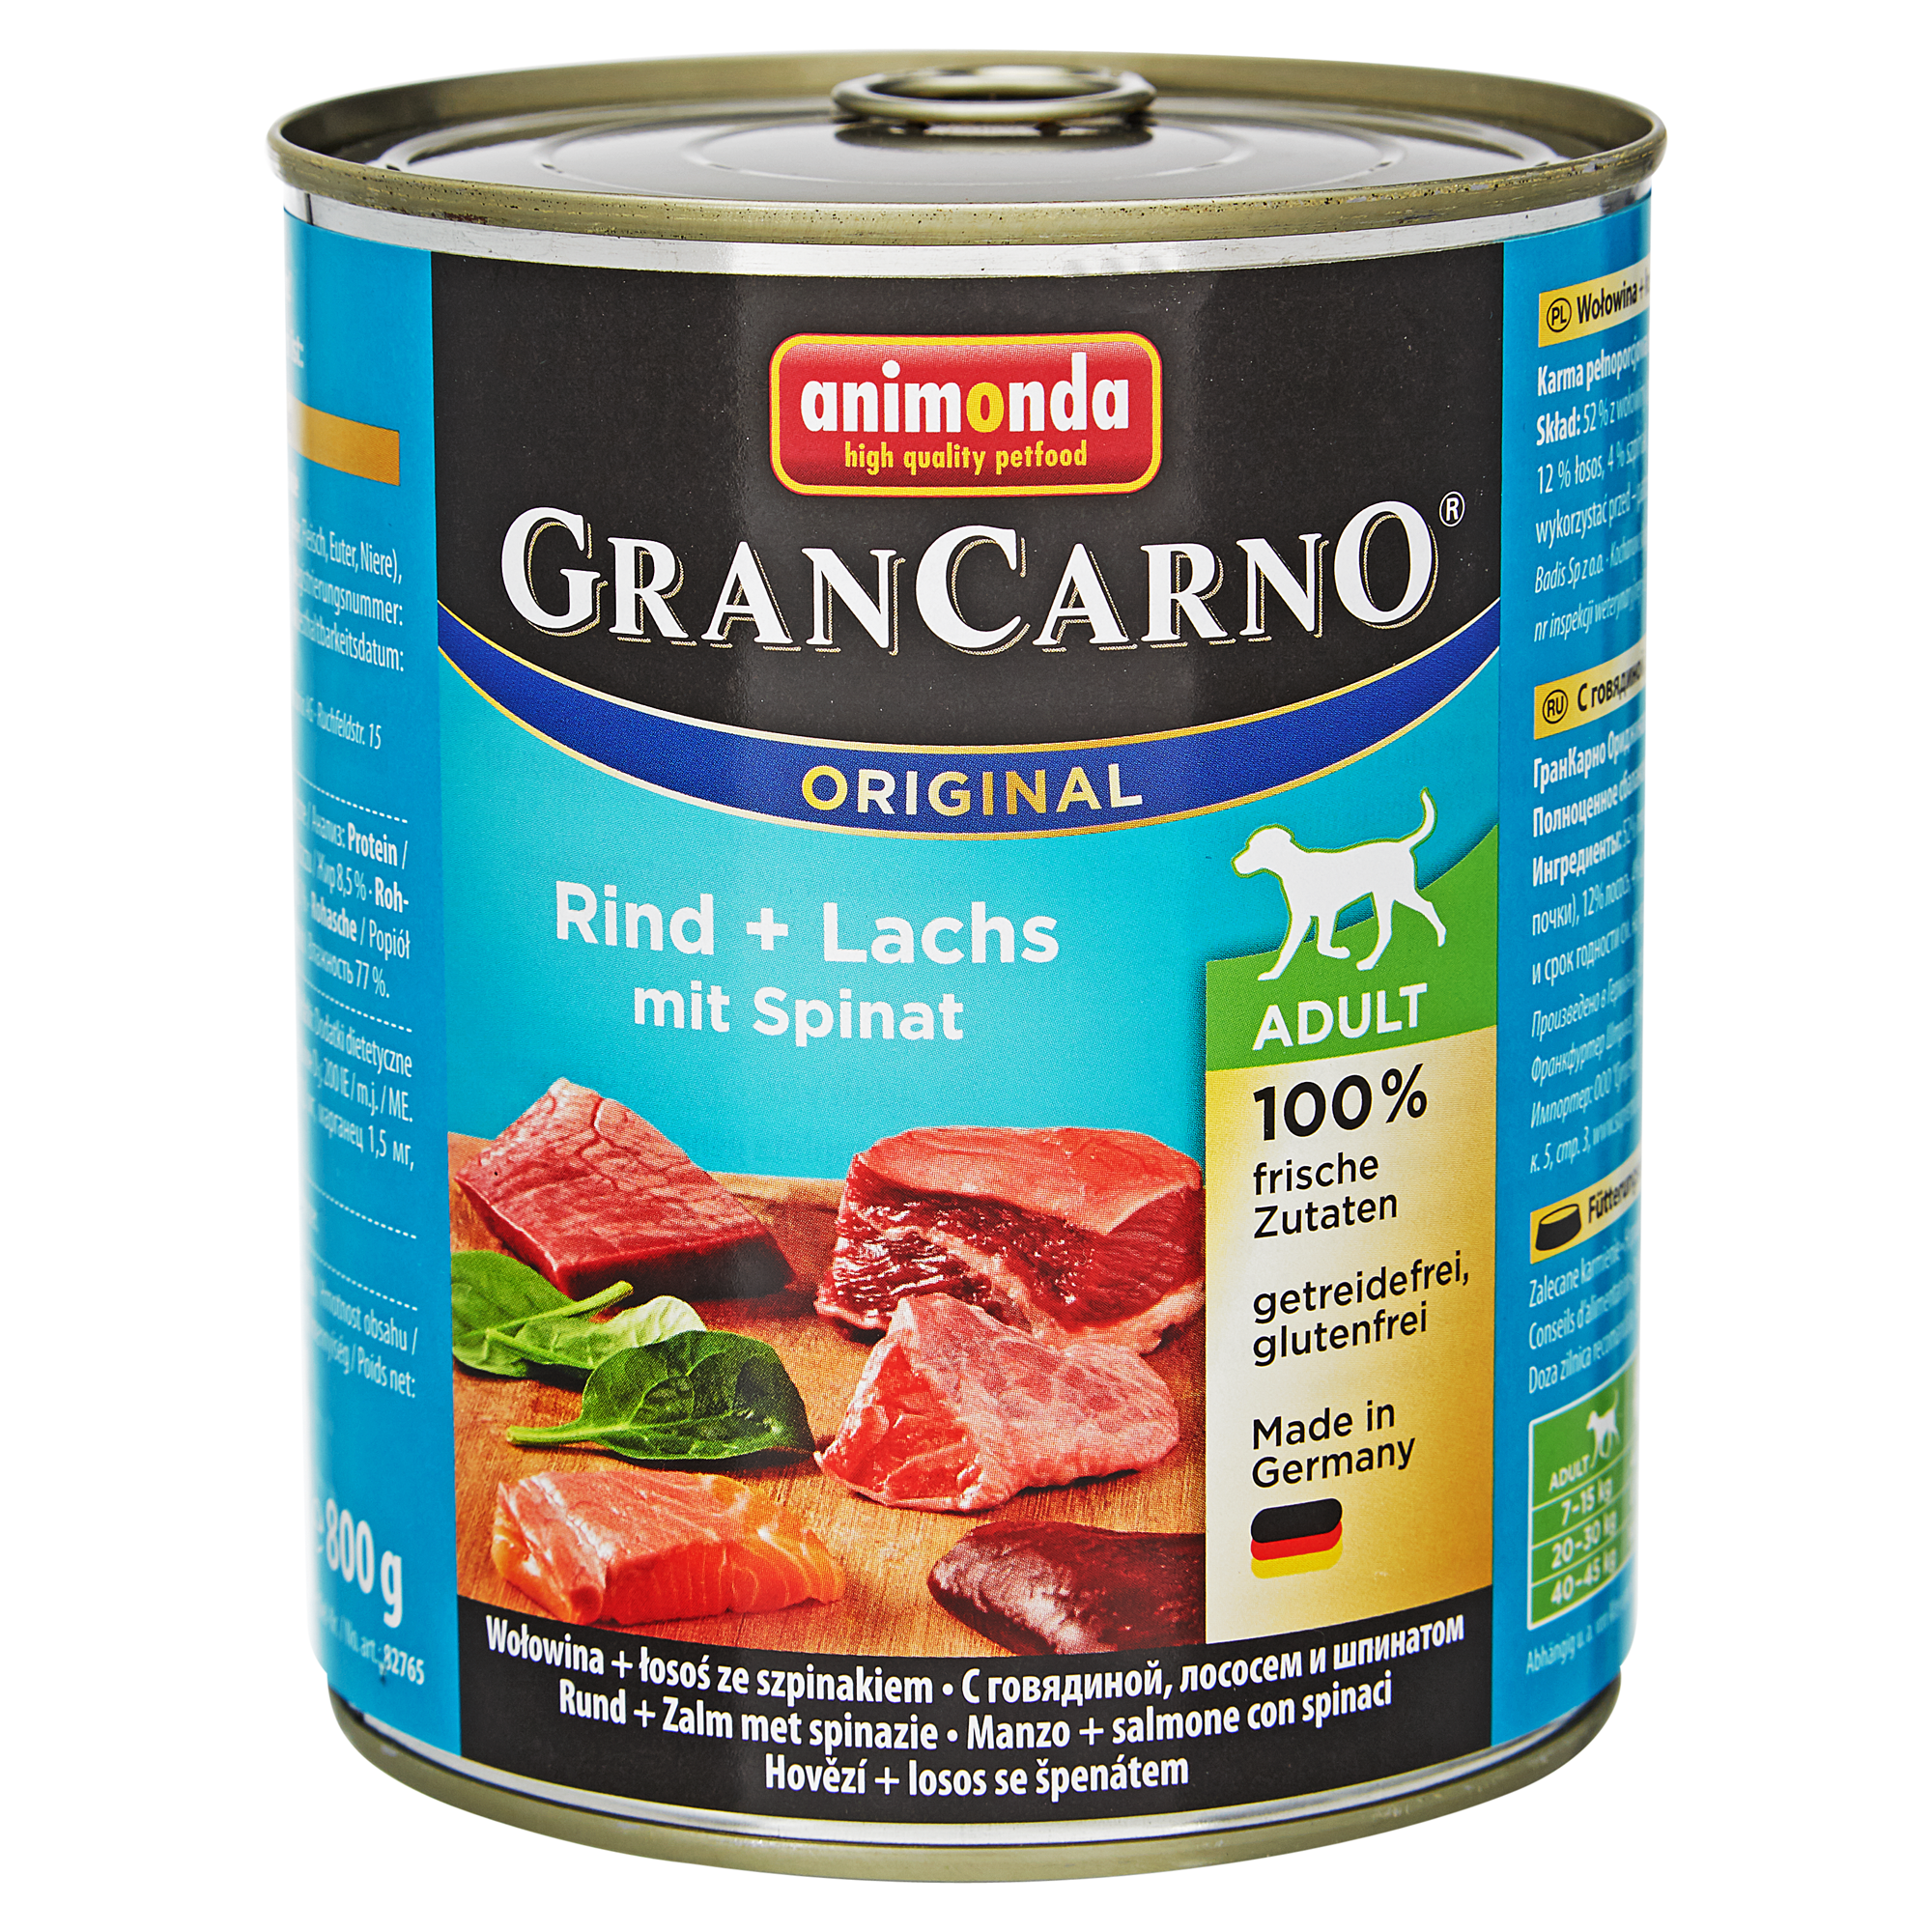 Hundenassfutter "Gran Carno" Original mit Rind/Lachs/Spinat 800 g + product picture